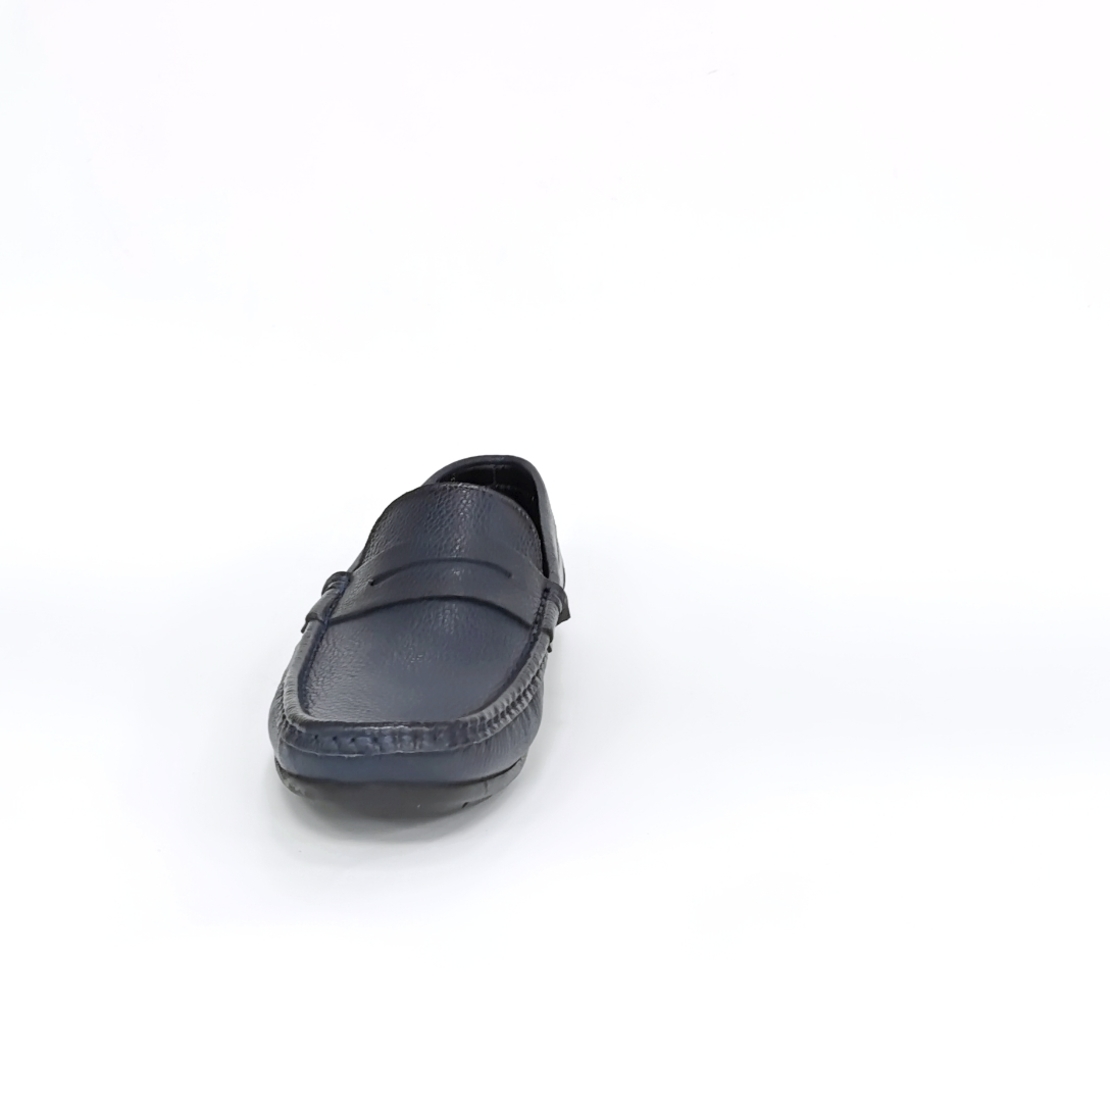 Мen's loafers made of natural leather in the color blue /7456